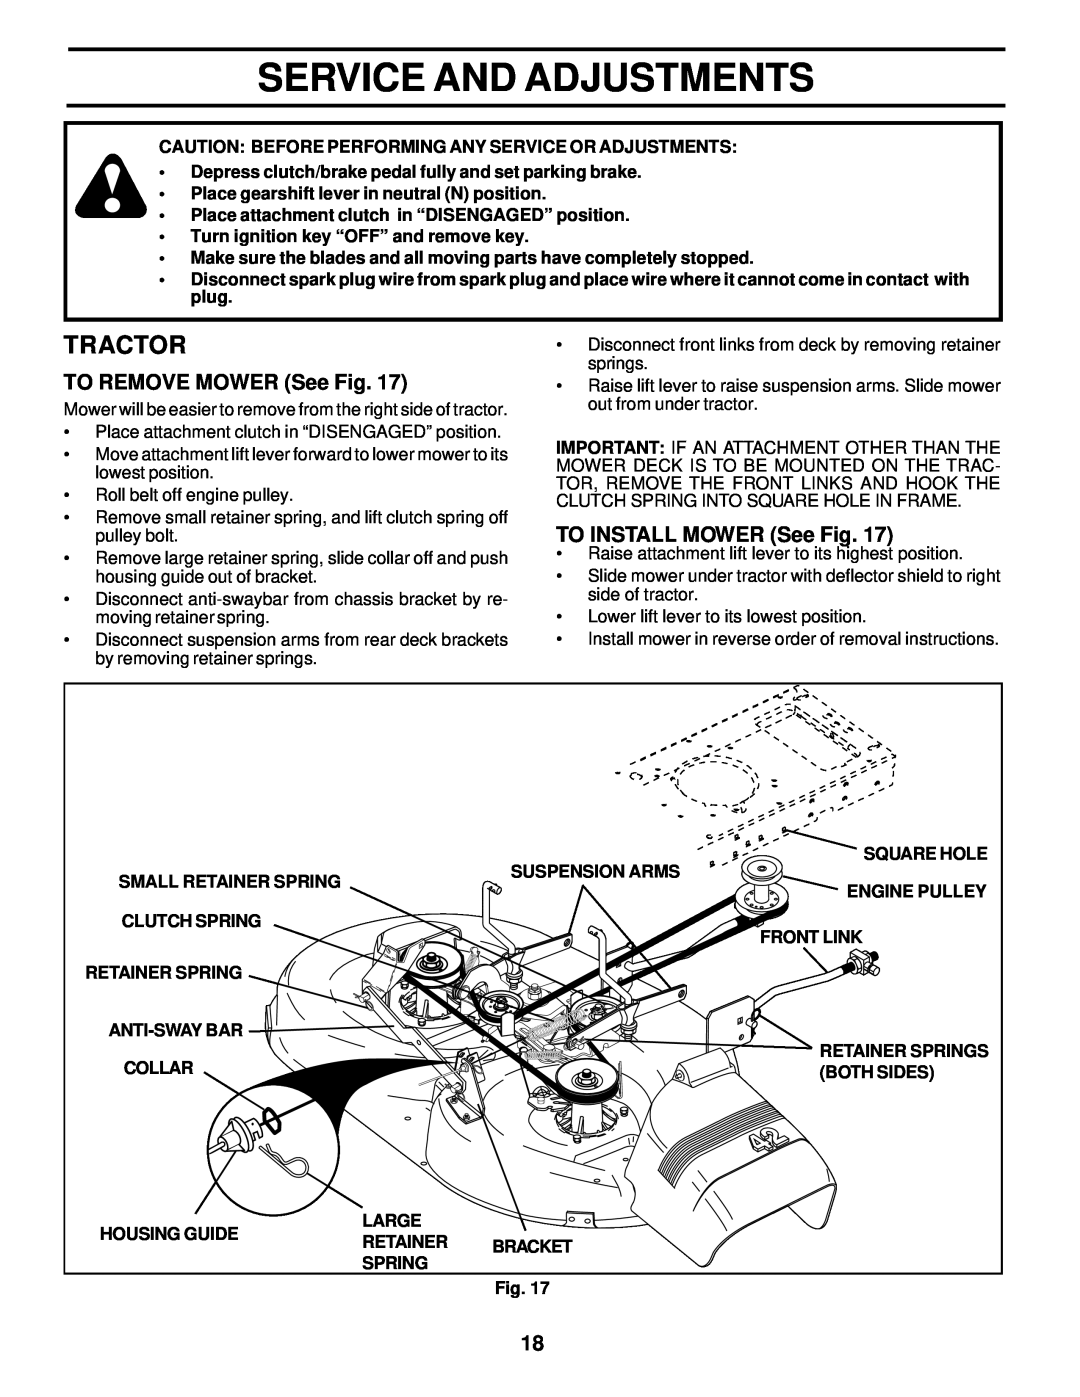 Poulan 177545 owner manual Service And Adjustments, TO REMOVE MOWER See Fig, TO INSTALL MOWER See Fig, Tractor 